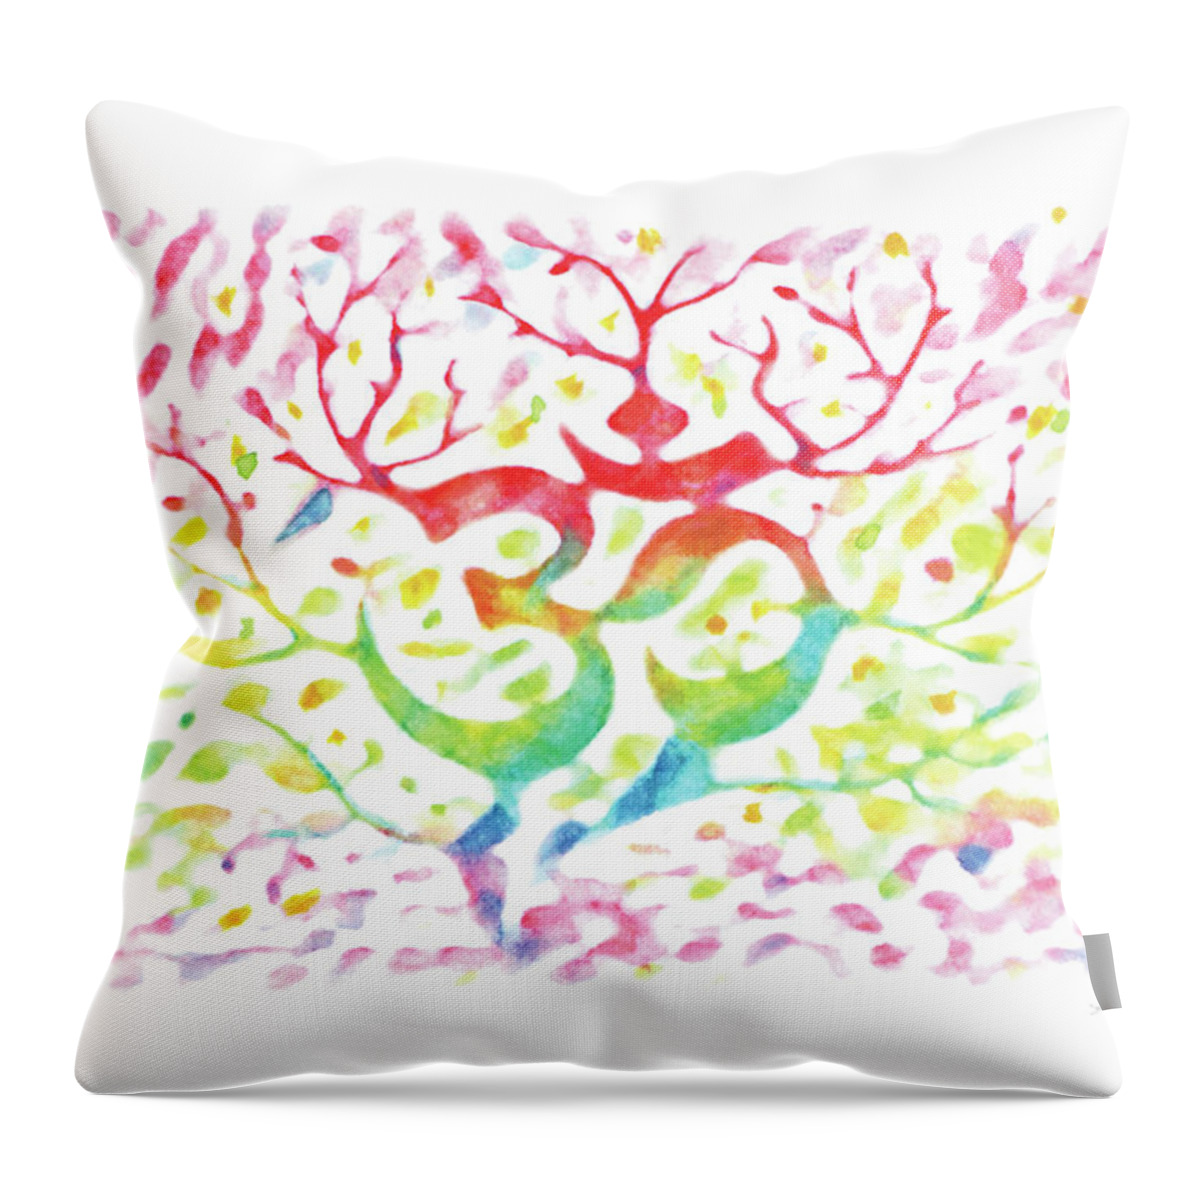 Yoga Mantra Om Tree Throw Pillow featuring the drawing Yoga mantra om tree-Watercolor,Colourful,Dazzling,ImpressionismHandmade,Hand-painted,Greeting Card by Artto Pan